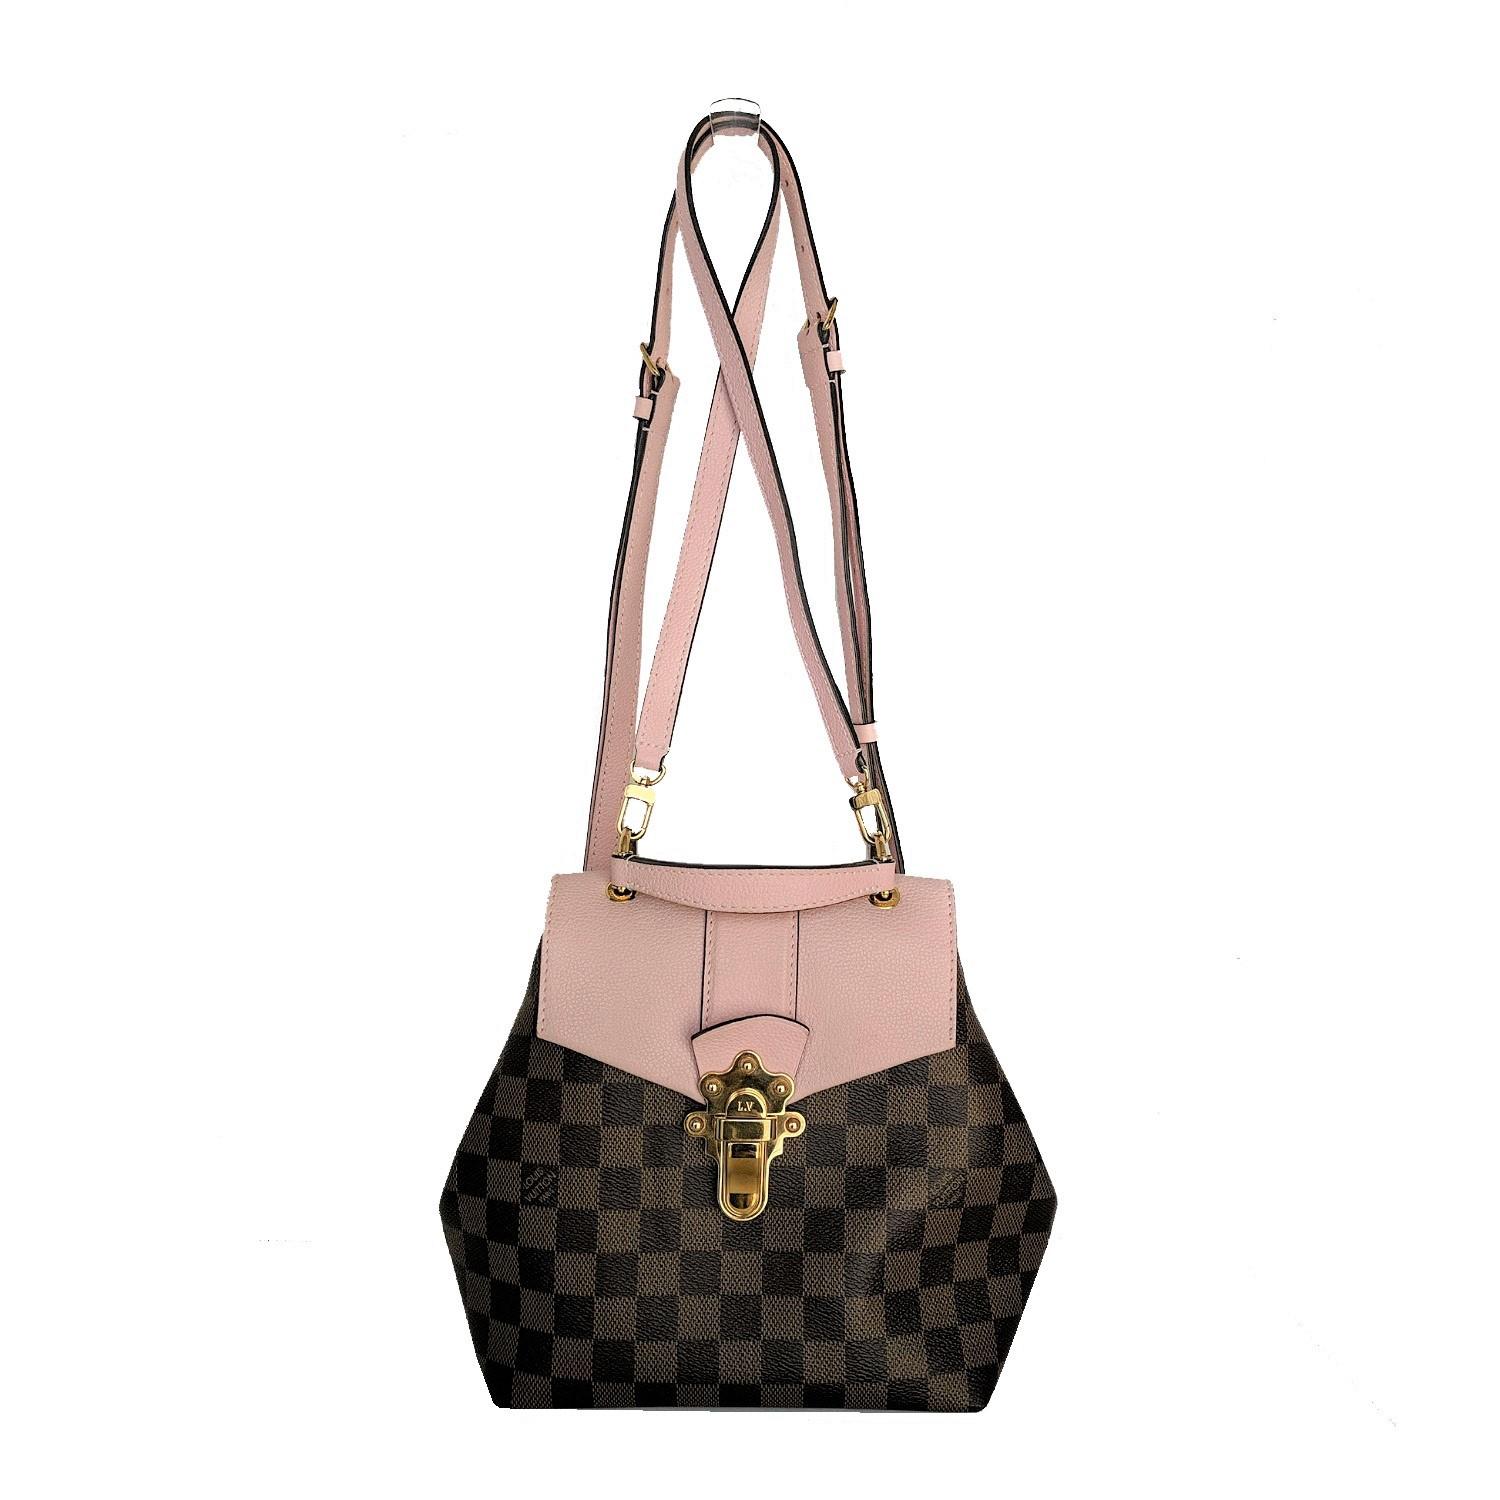 This shoulder bag features a pink grained calfskin leather front flap, a handle, optional adjustable pink leather shoulder straps and a polished brass LV press lock. The front flap opens to a light pink fabric interior with a patch pocket. This is a